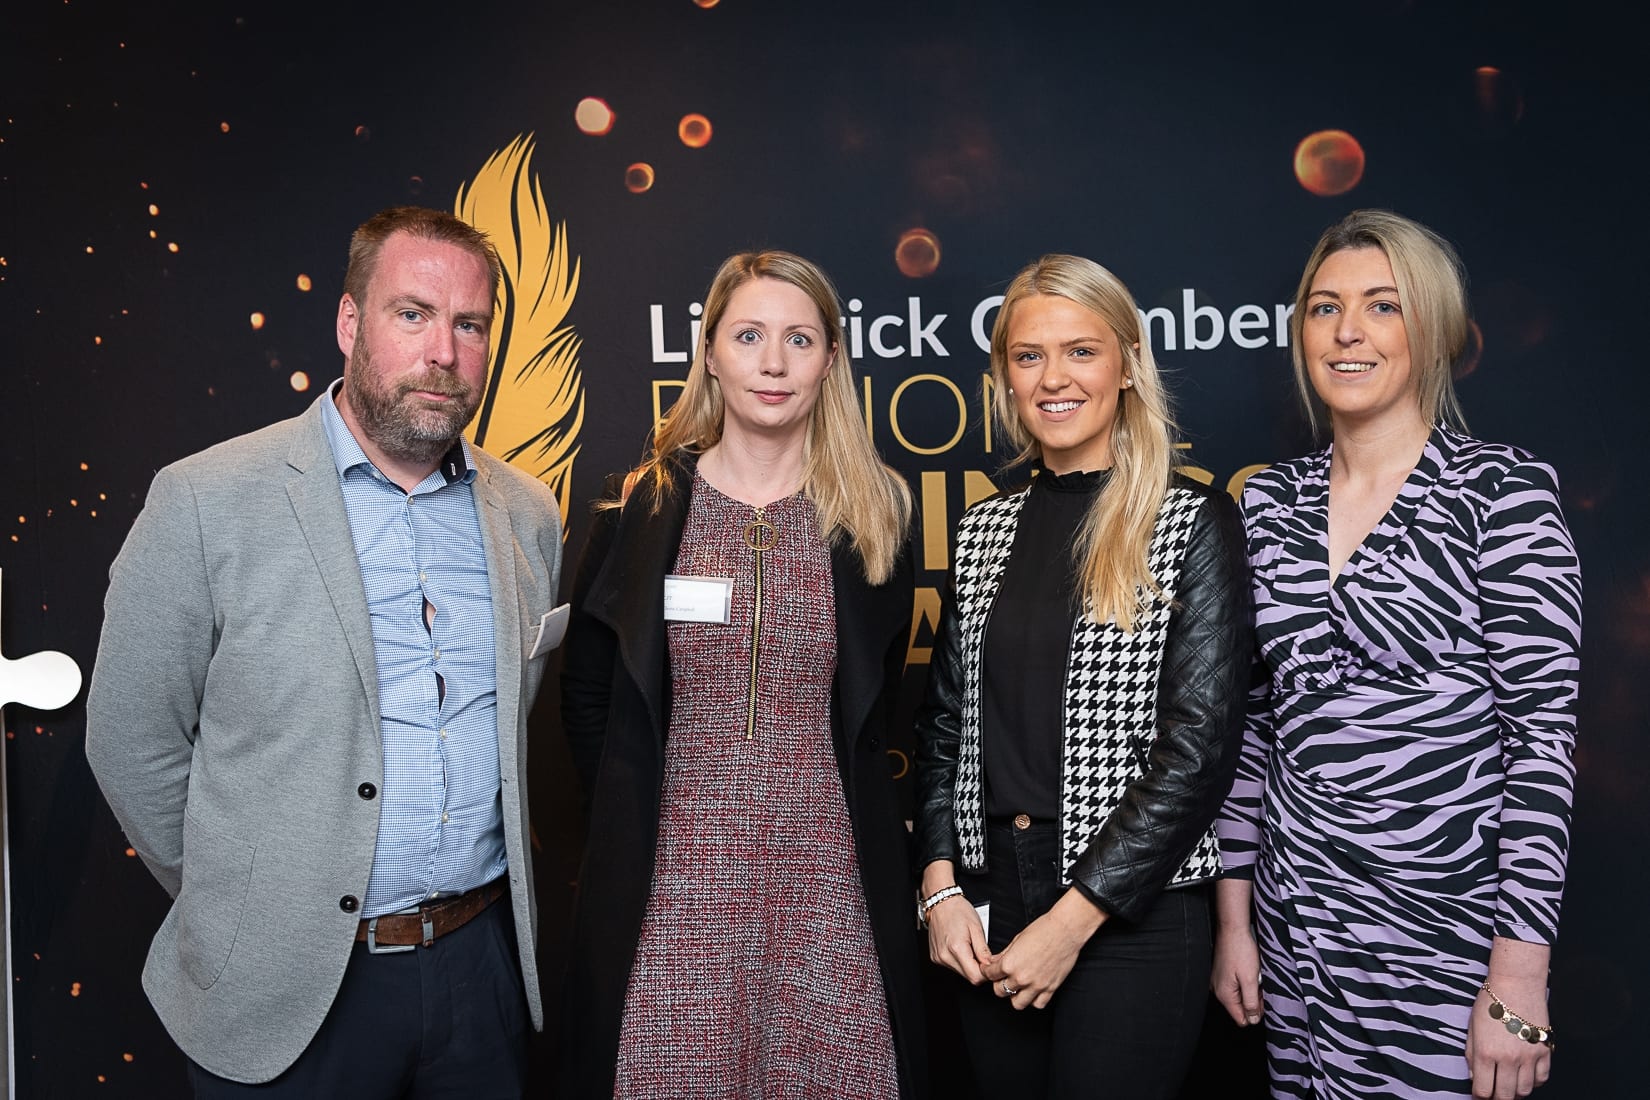 No repro fee-Limerick Chamber President Dinner Shortlist announcement which was held in The Limerick Strand Hotel on Wednesday 16th October  - From Left to Right: Philip Hennessy - LIT, Cliona Campbell - LIT, Aoife O’Rourke - Rahi Systems, Bridget O’Dea - Rahi Systems. 
Photo credit Shauna Kennedy